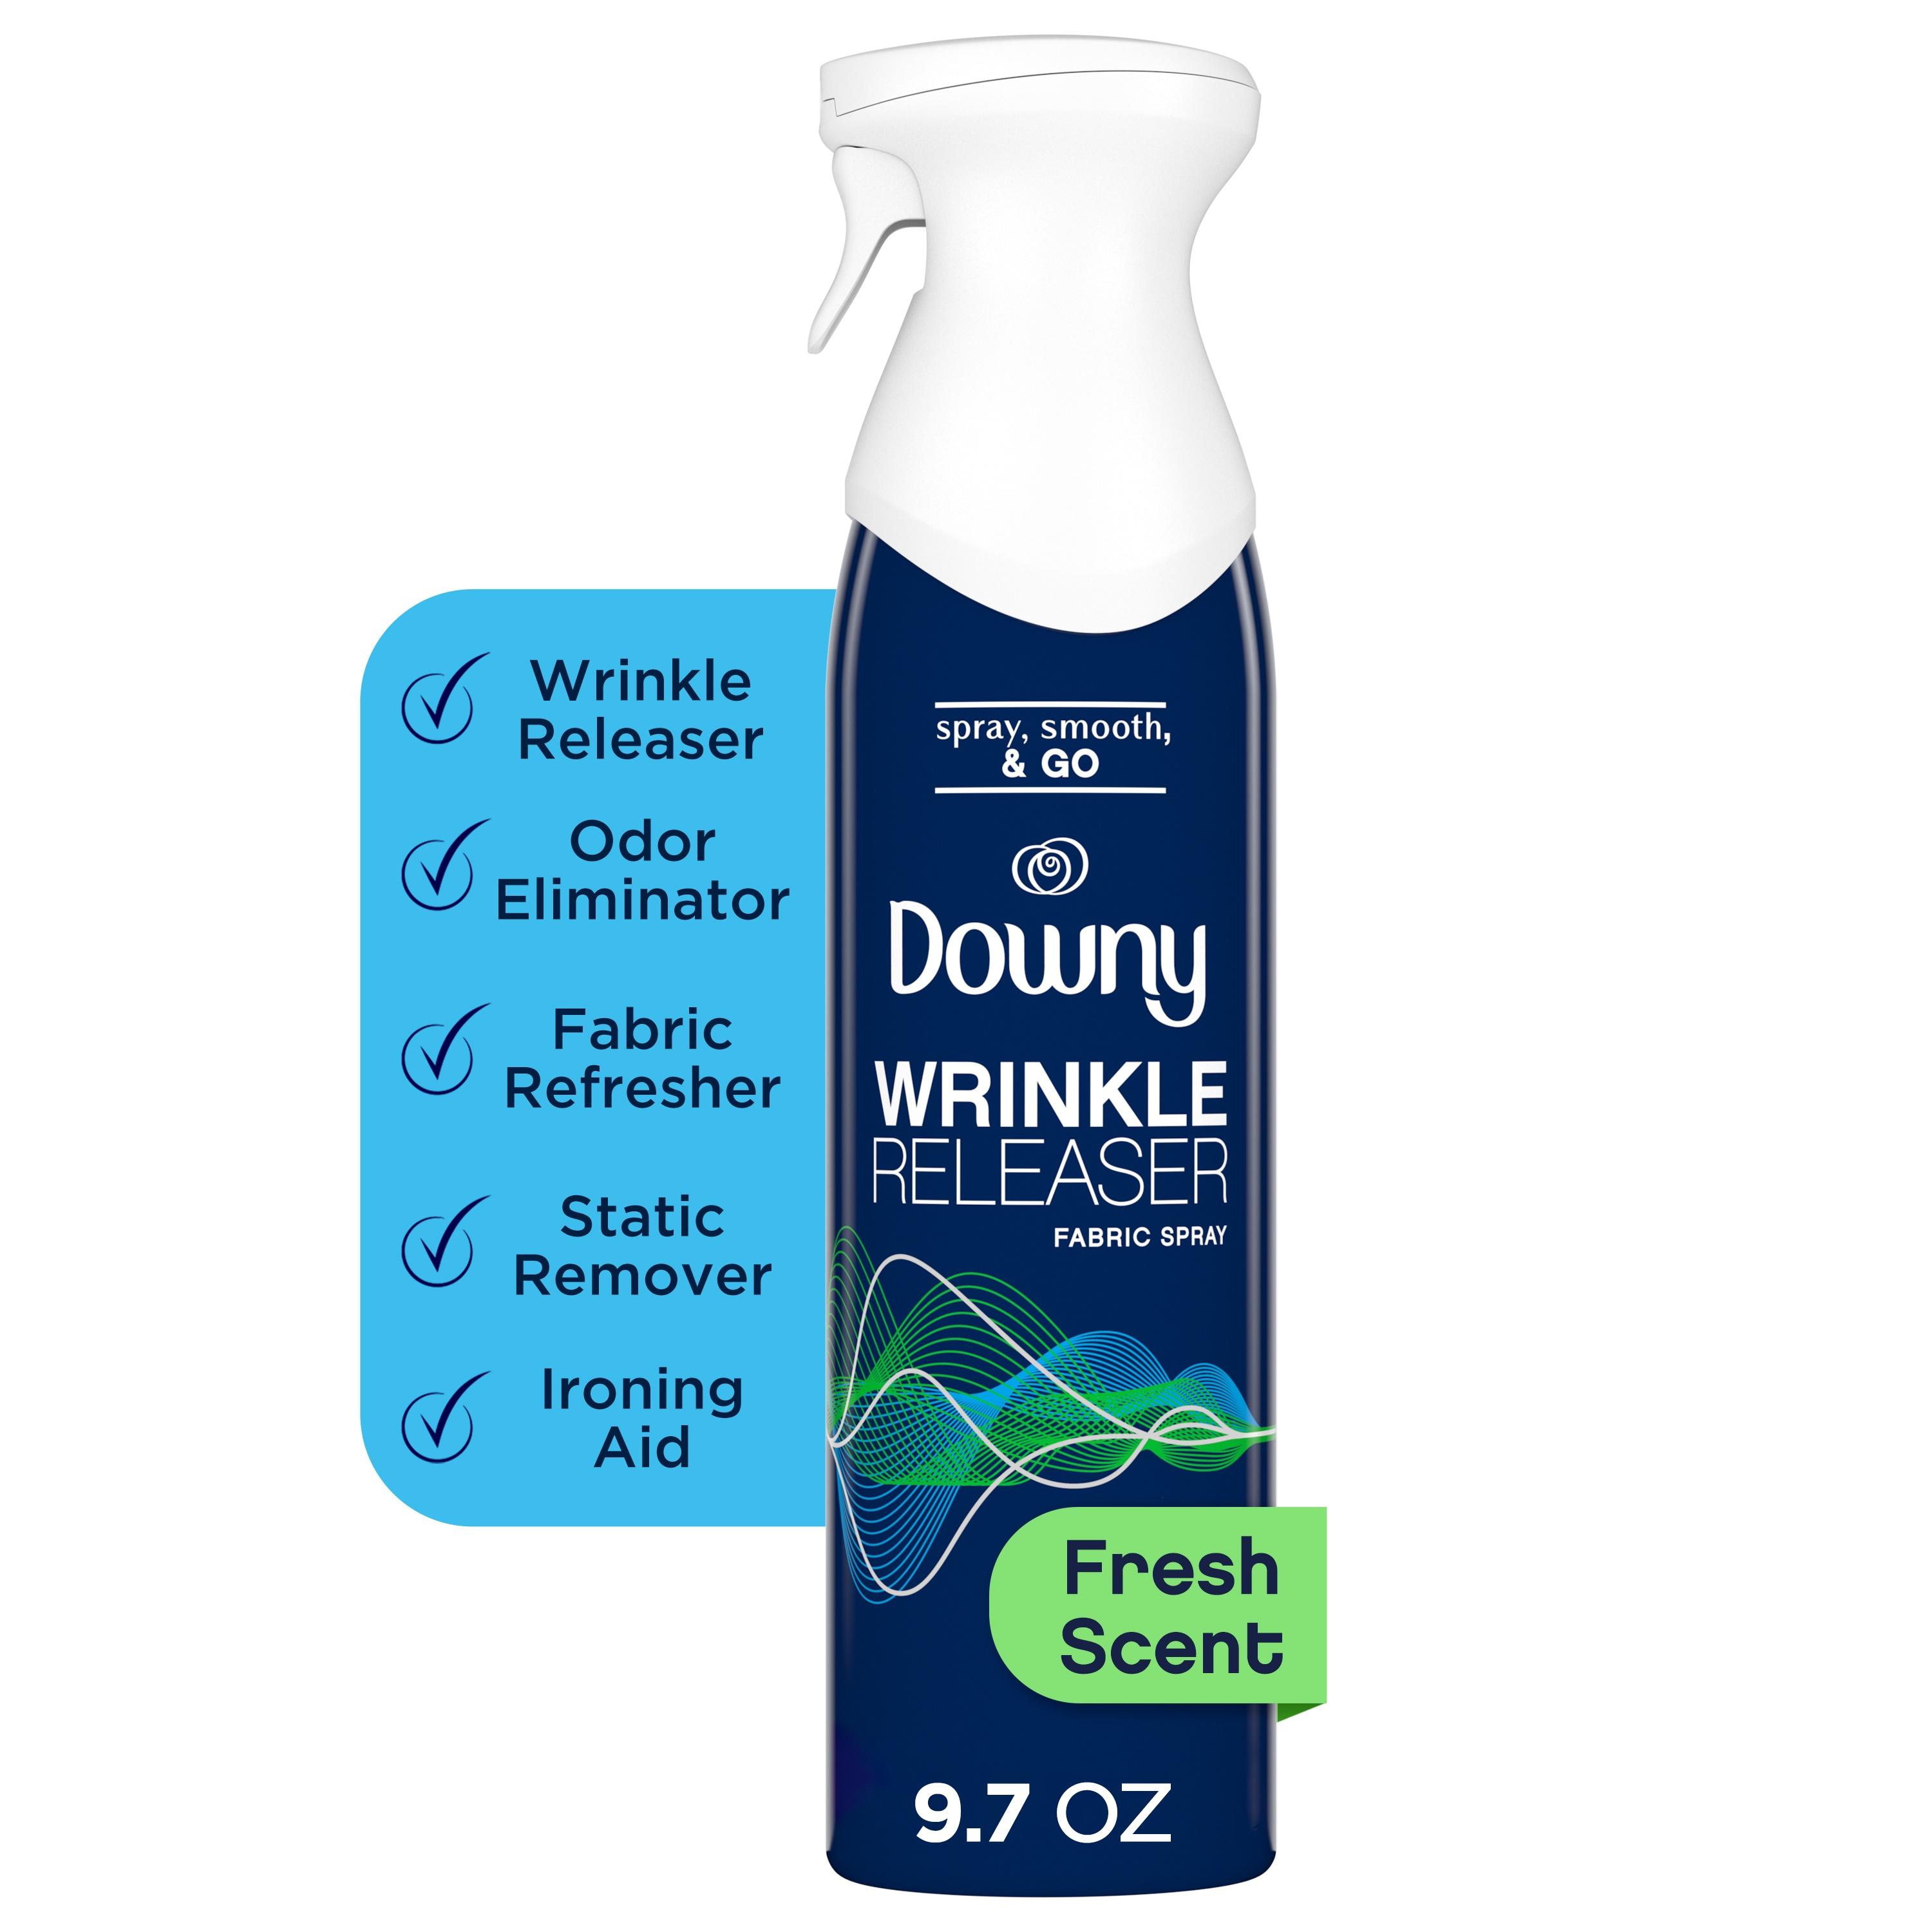 Downy Wrinkle Releaser and Refresher Fabric Spray, Starch Alternative, Fresh Scent, 9.7 oz - image 1 of 10